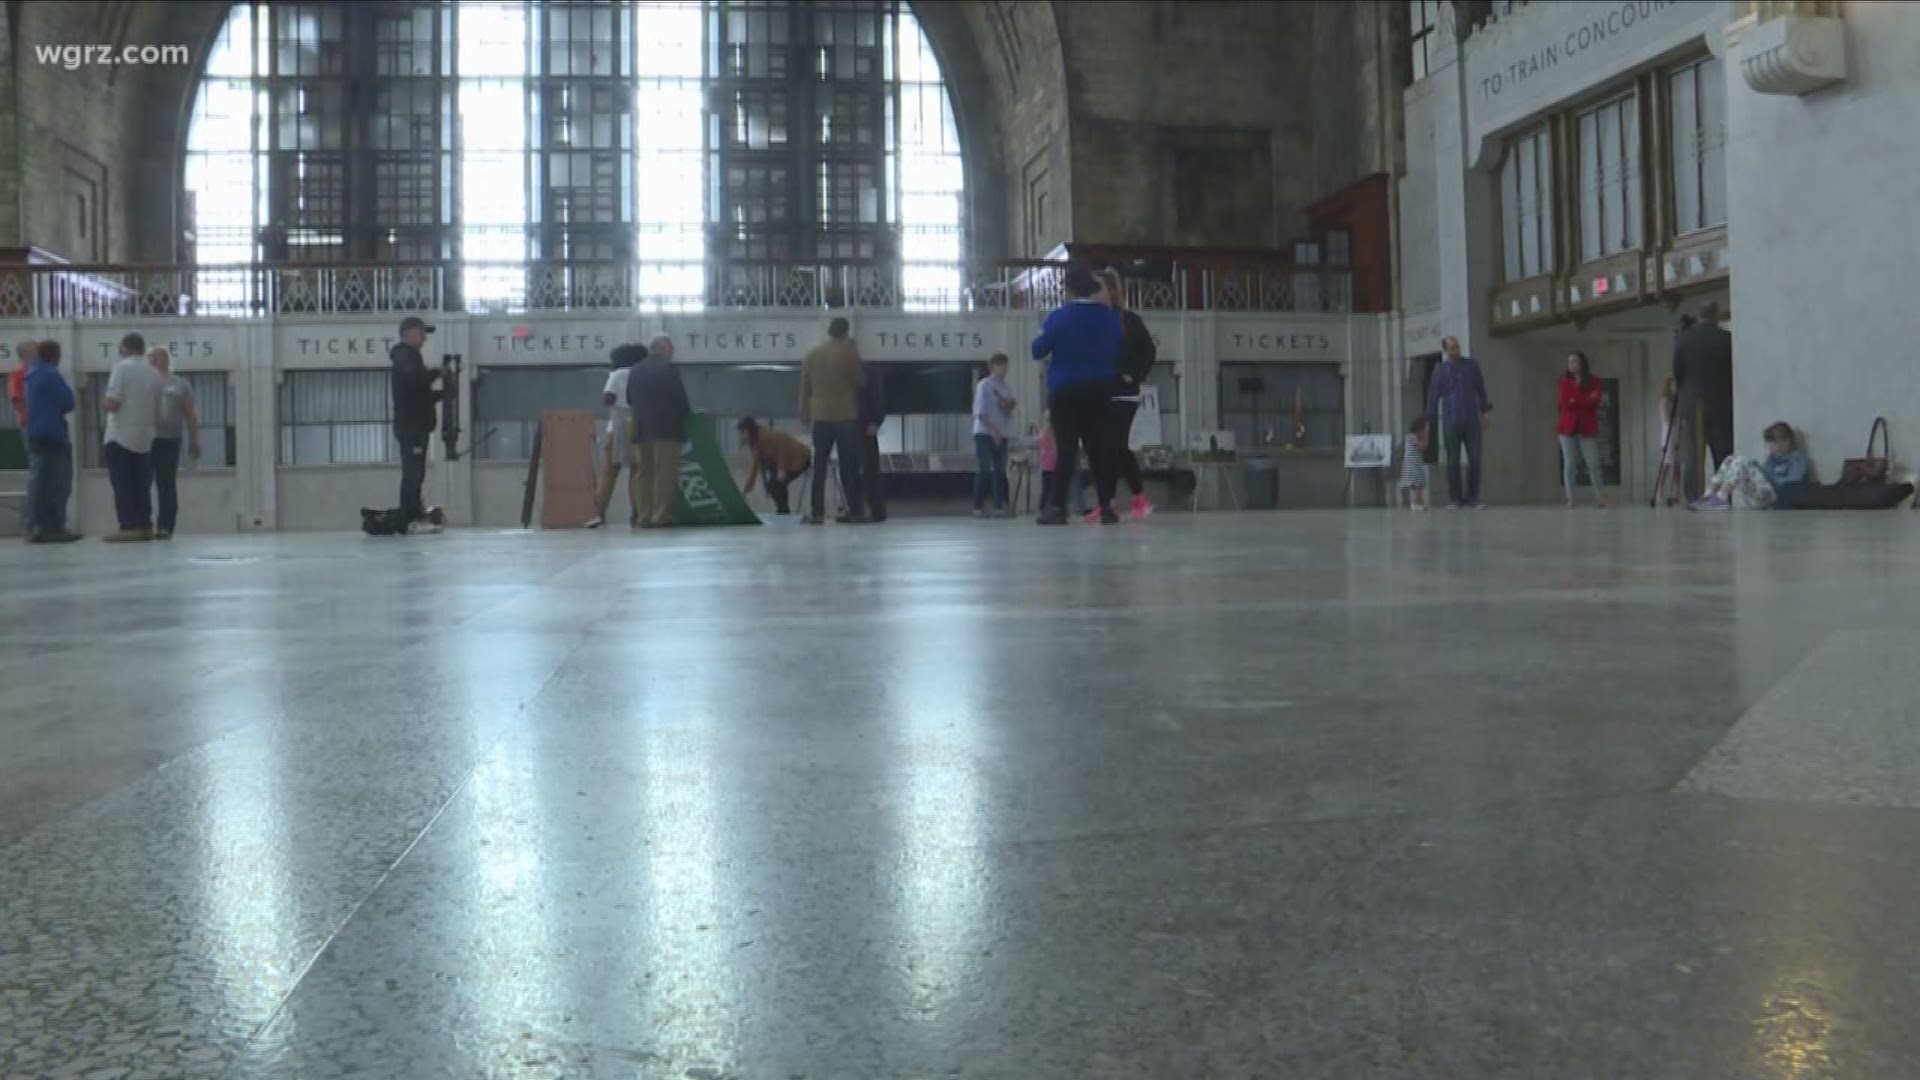 The Central Terminal is celebrating 90 years and to mark the occasion, the B-P-O, local leaders, and the Central Terminal Restoration Corporation threw a one-day festival with music, art, and food.